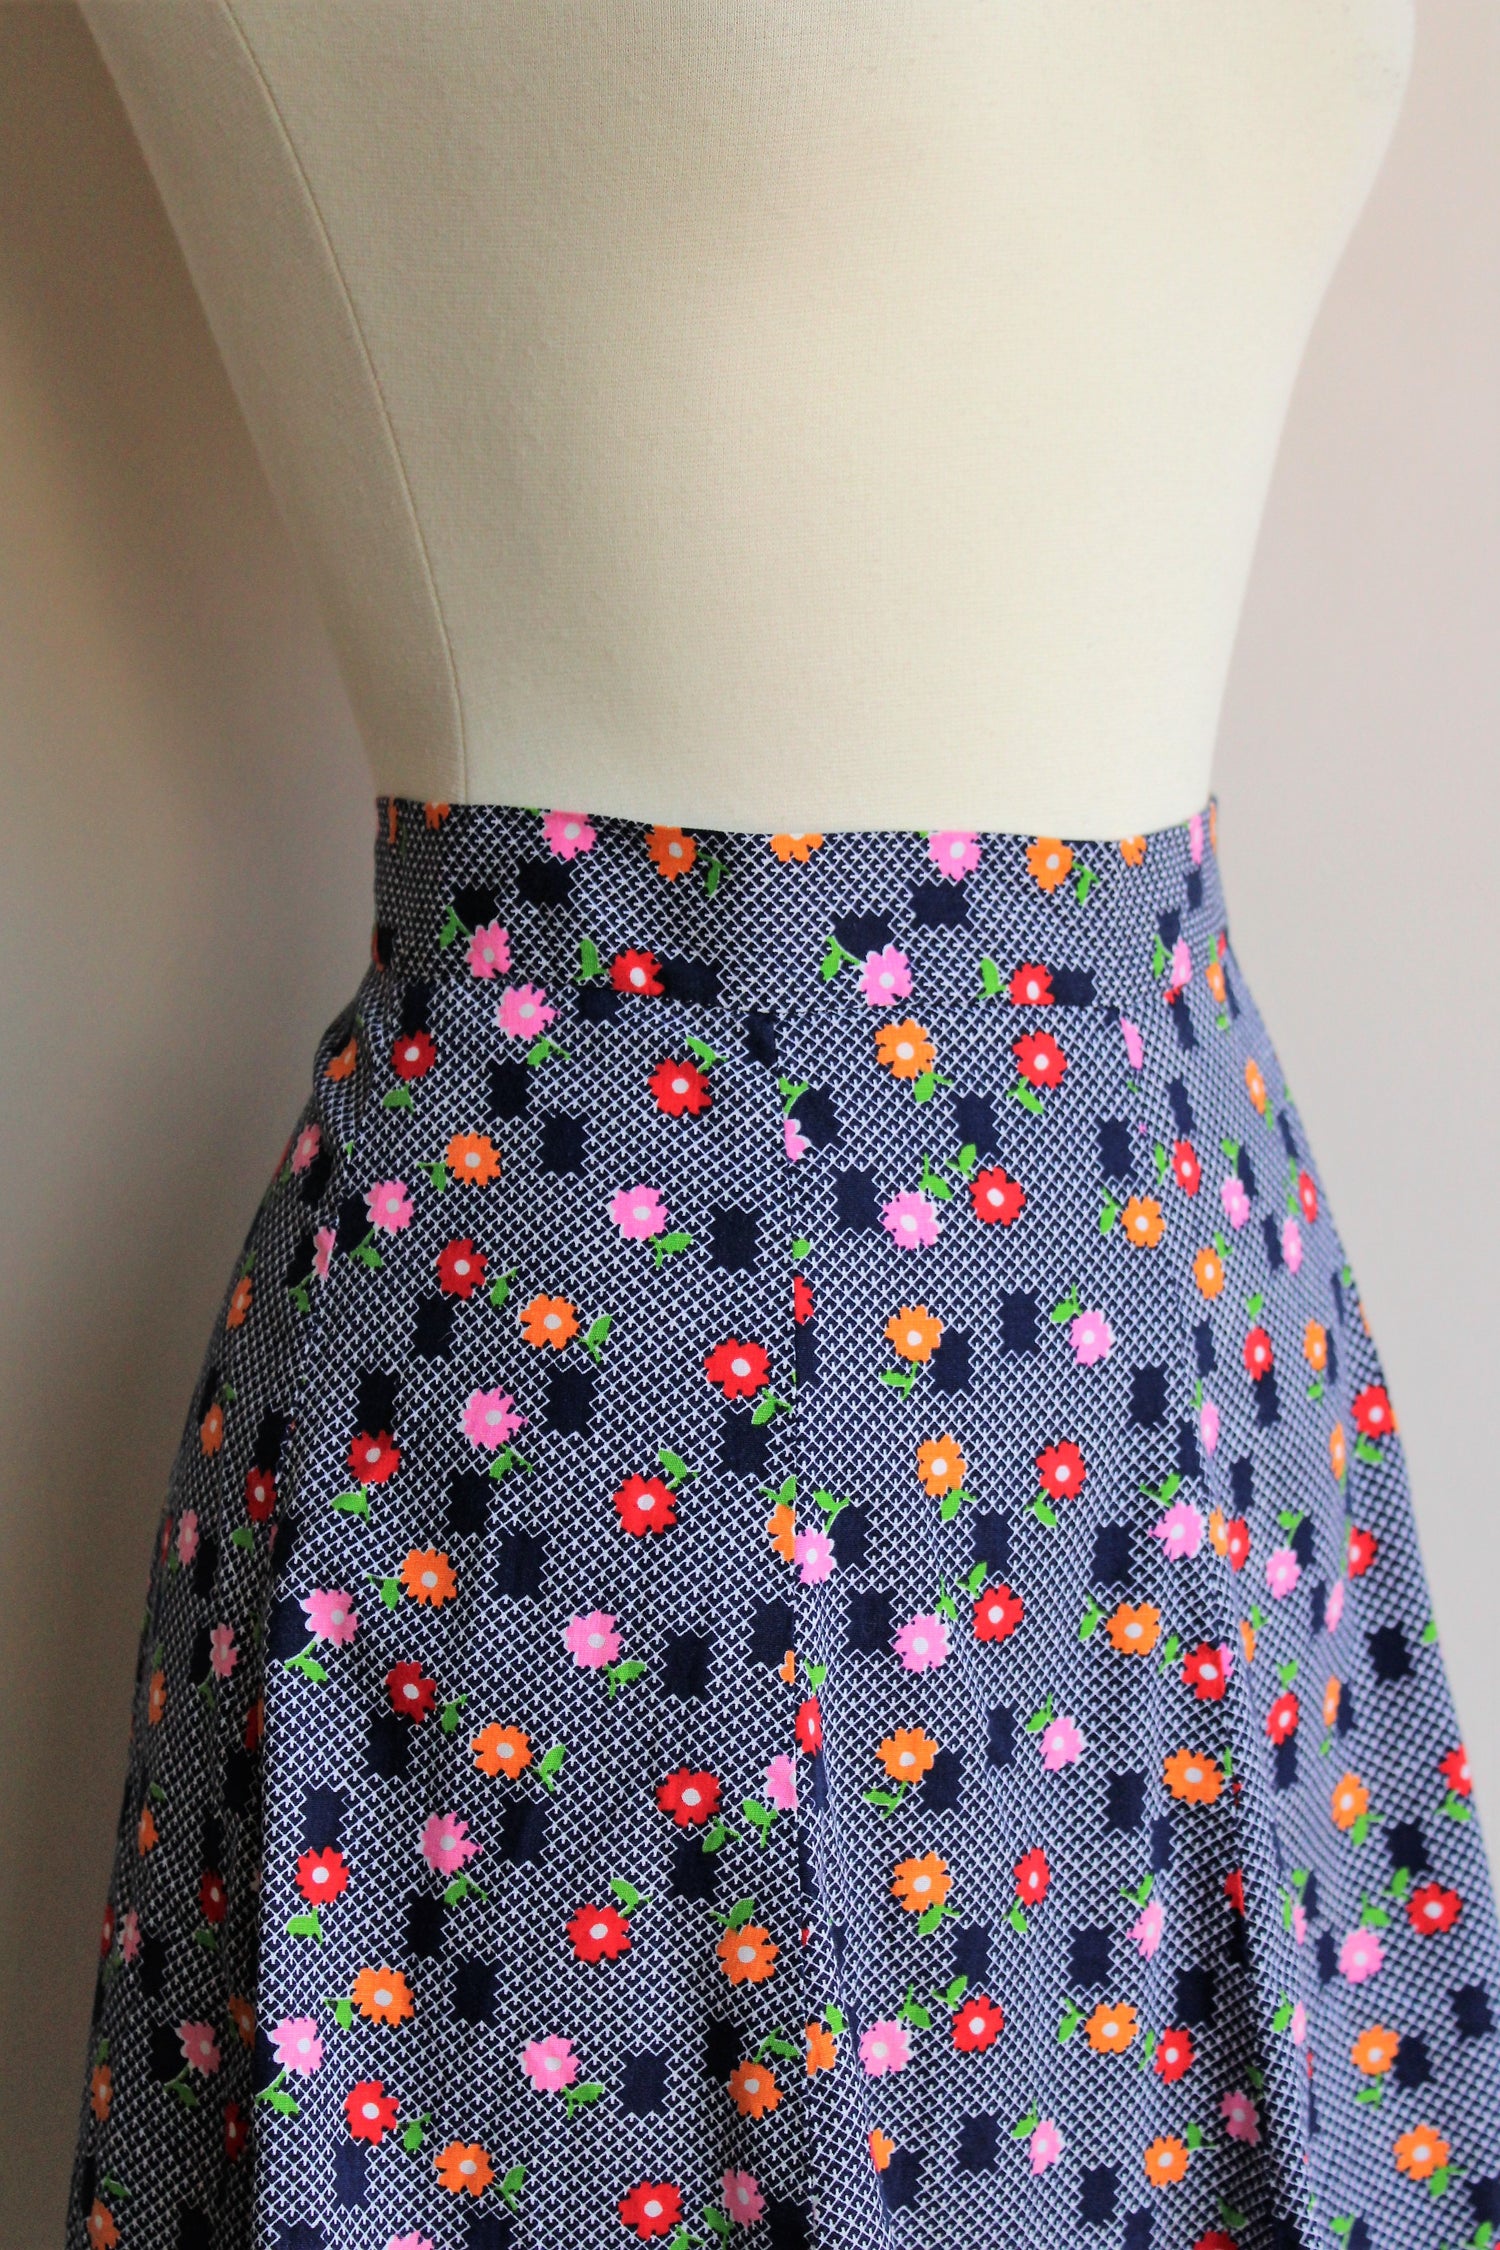 Vintage 1970s Skirt With Navy Blue Flowers